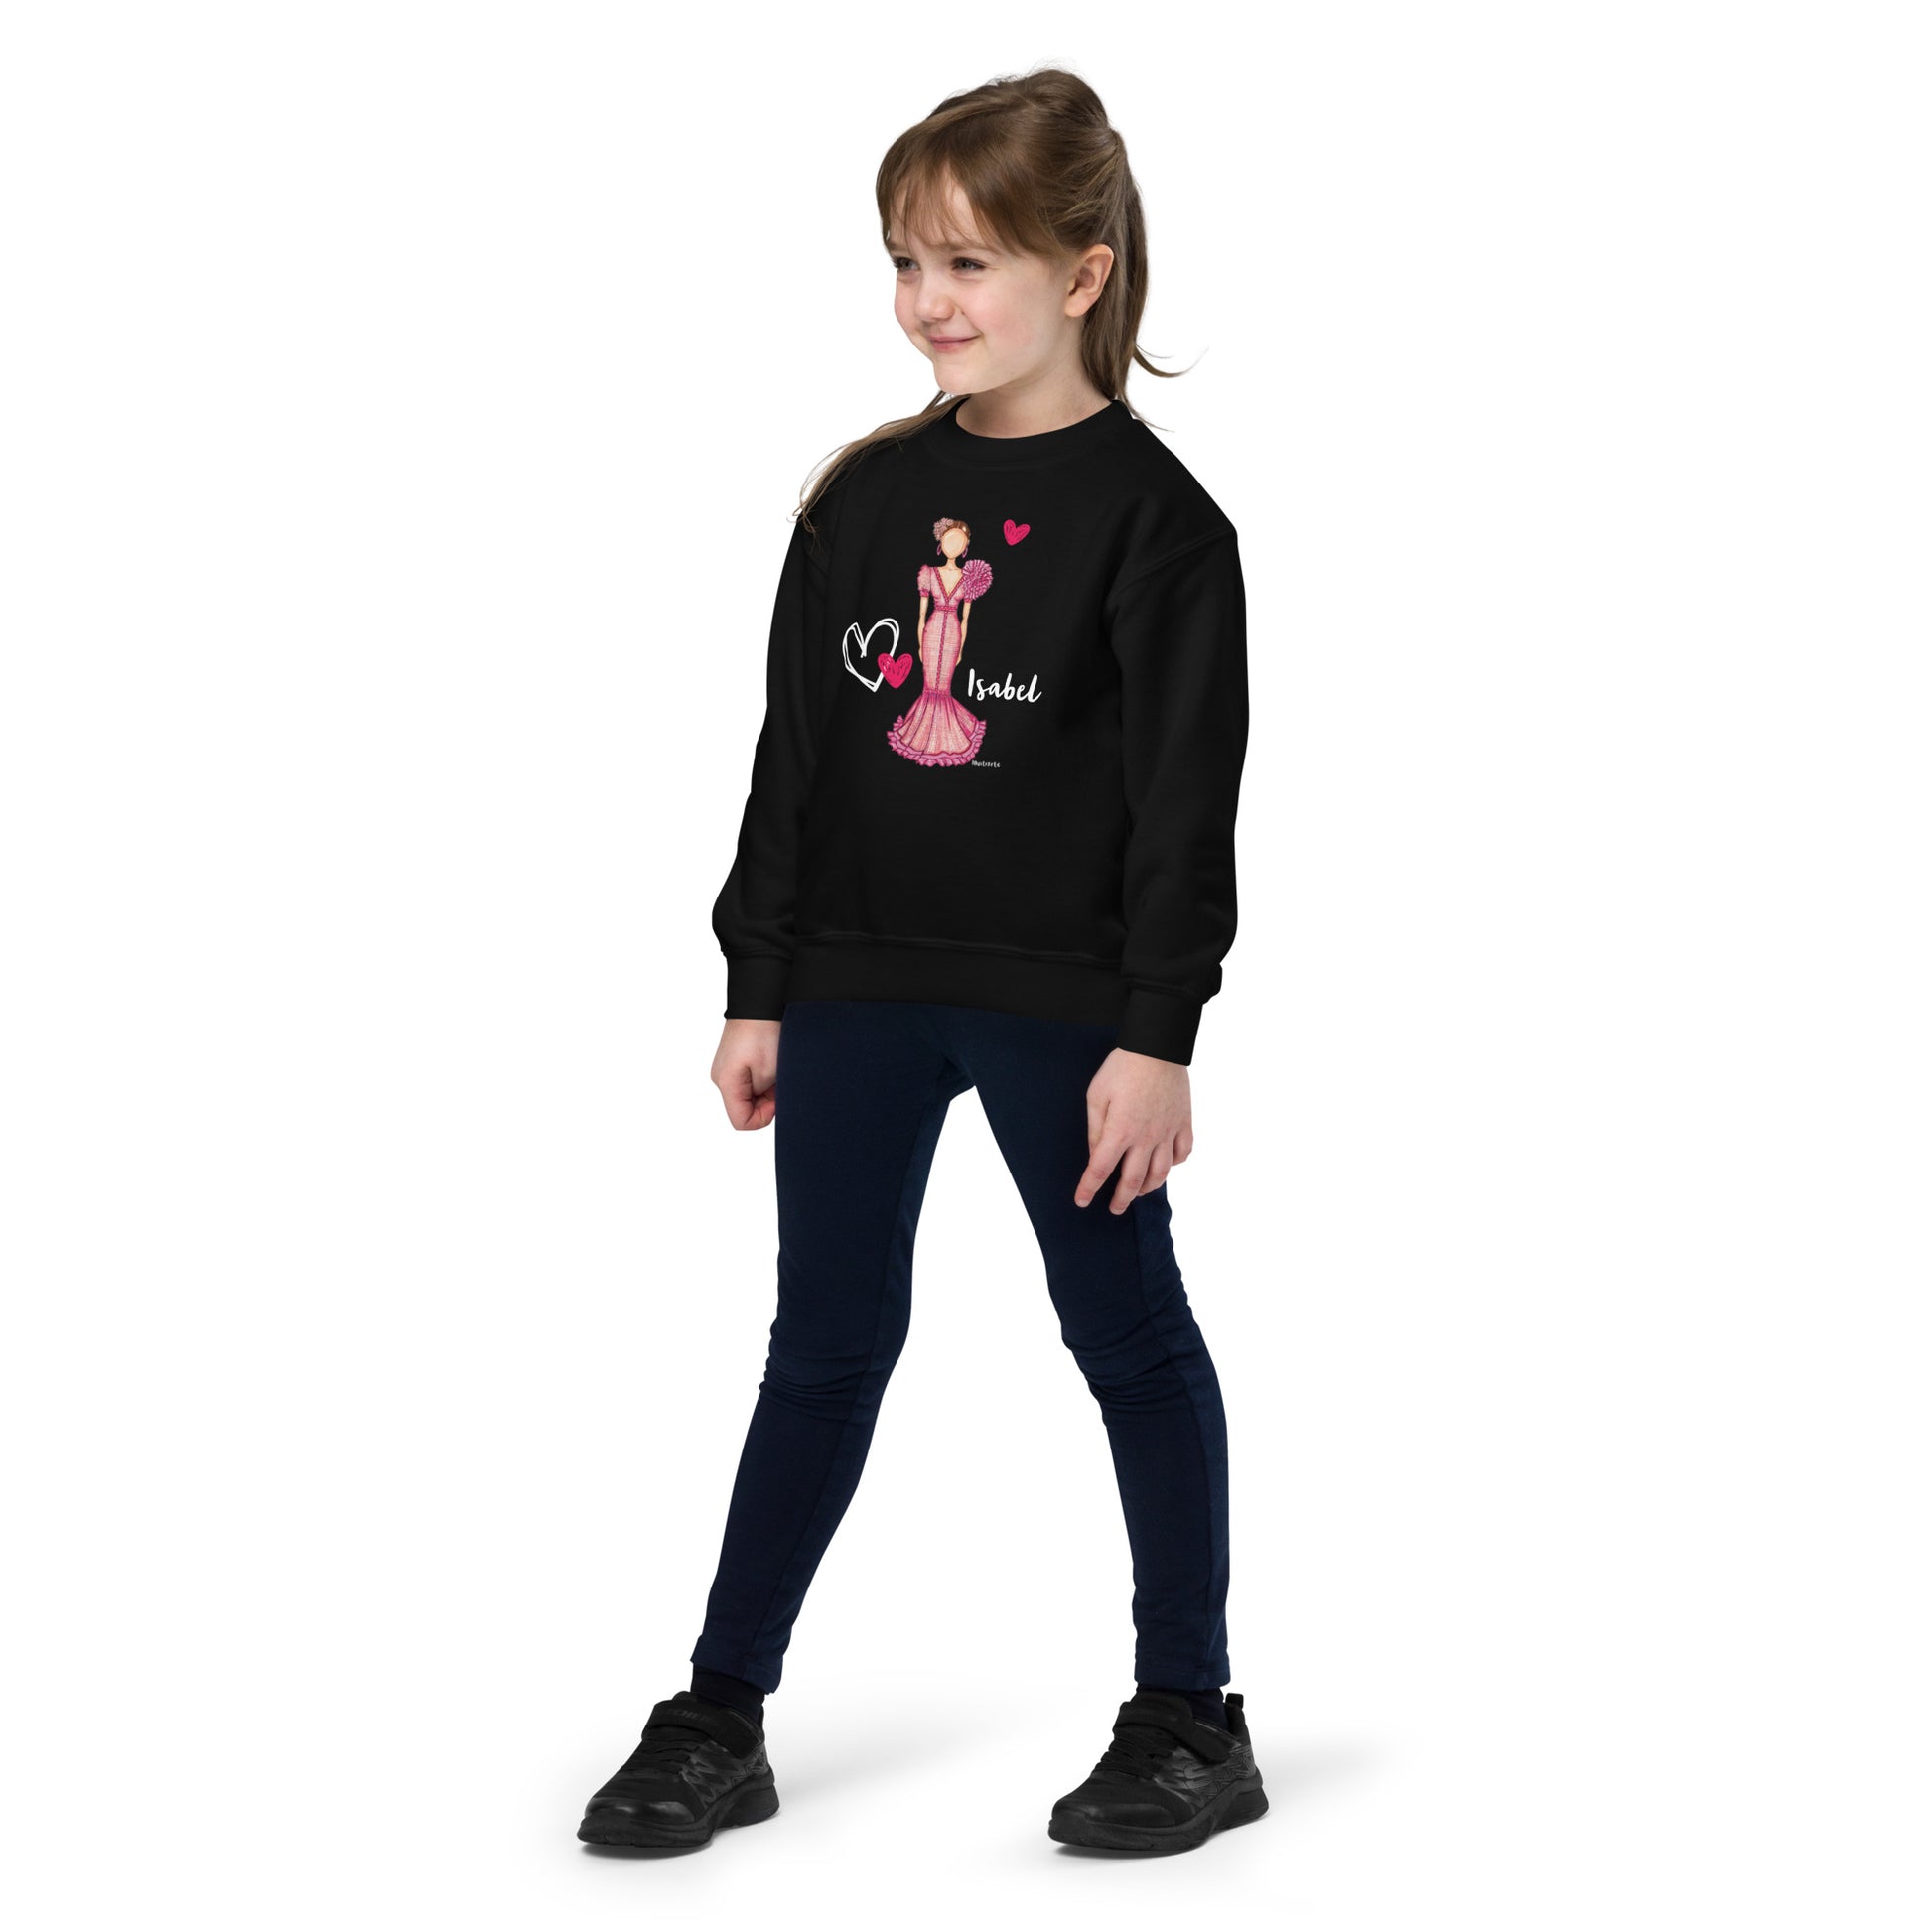 a young girl wearing a black sweatshirt and jeans